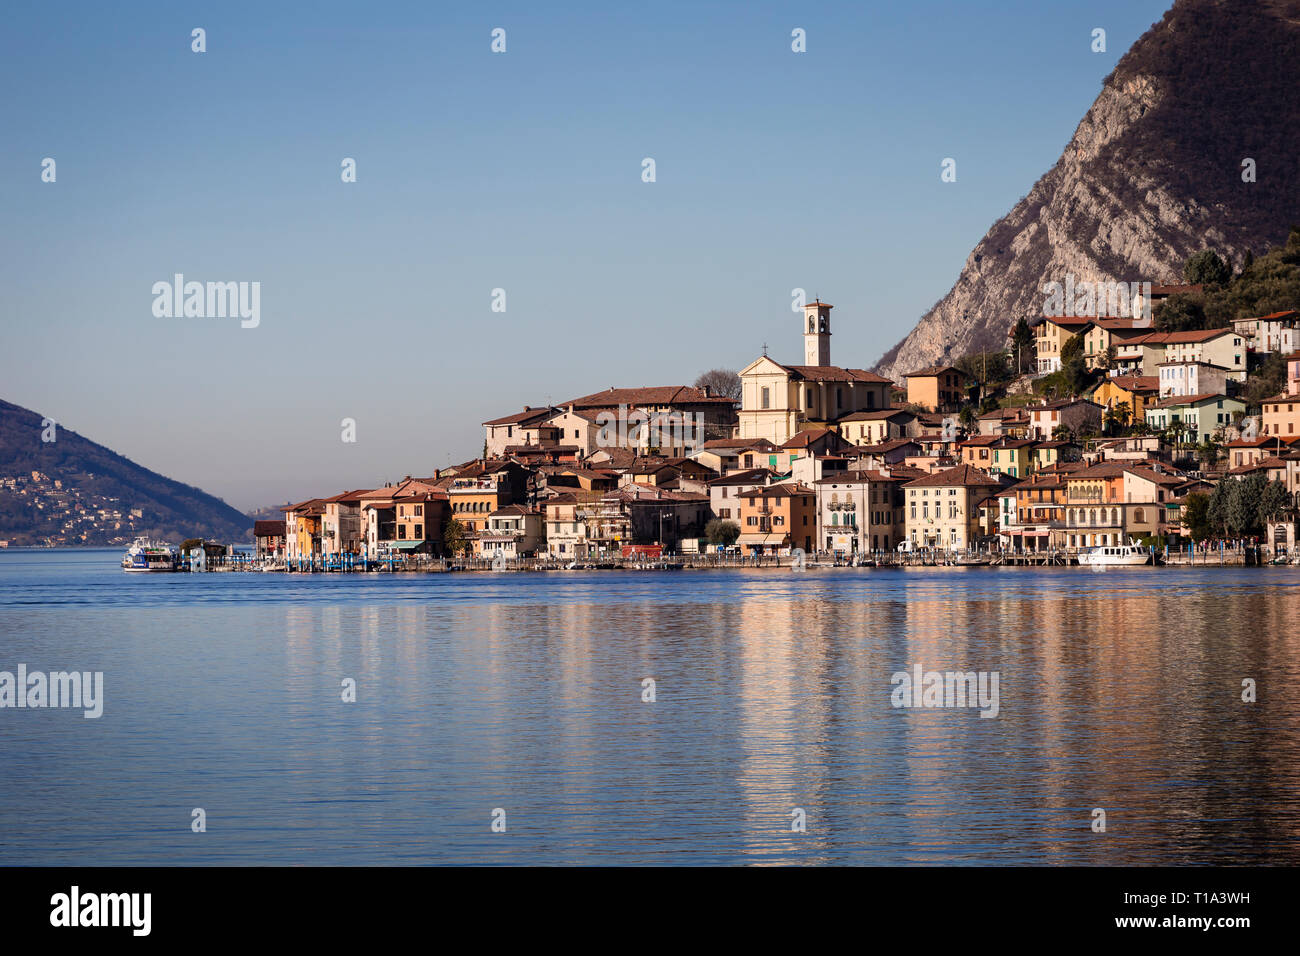 The town of Peschiera Maraglio on Monte Isola island, Lake Iseo, Lombardy, Italy Stock Photo